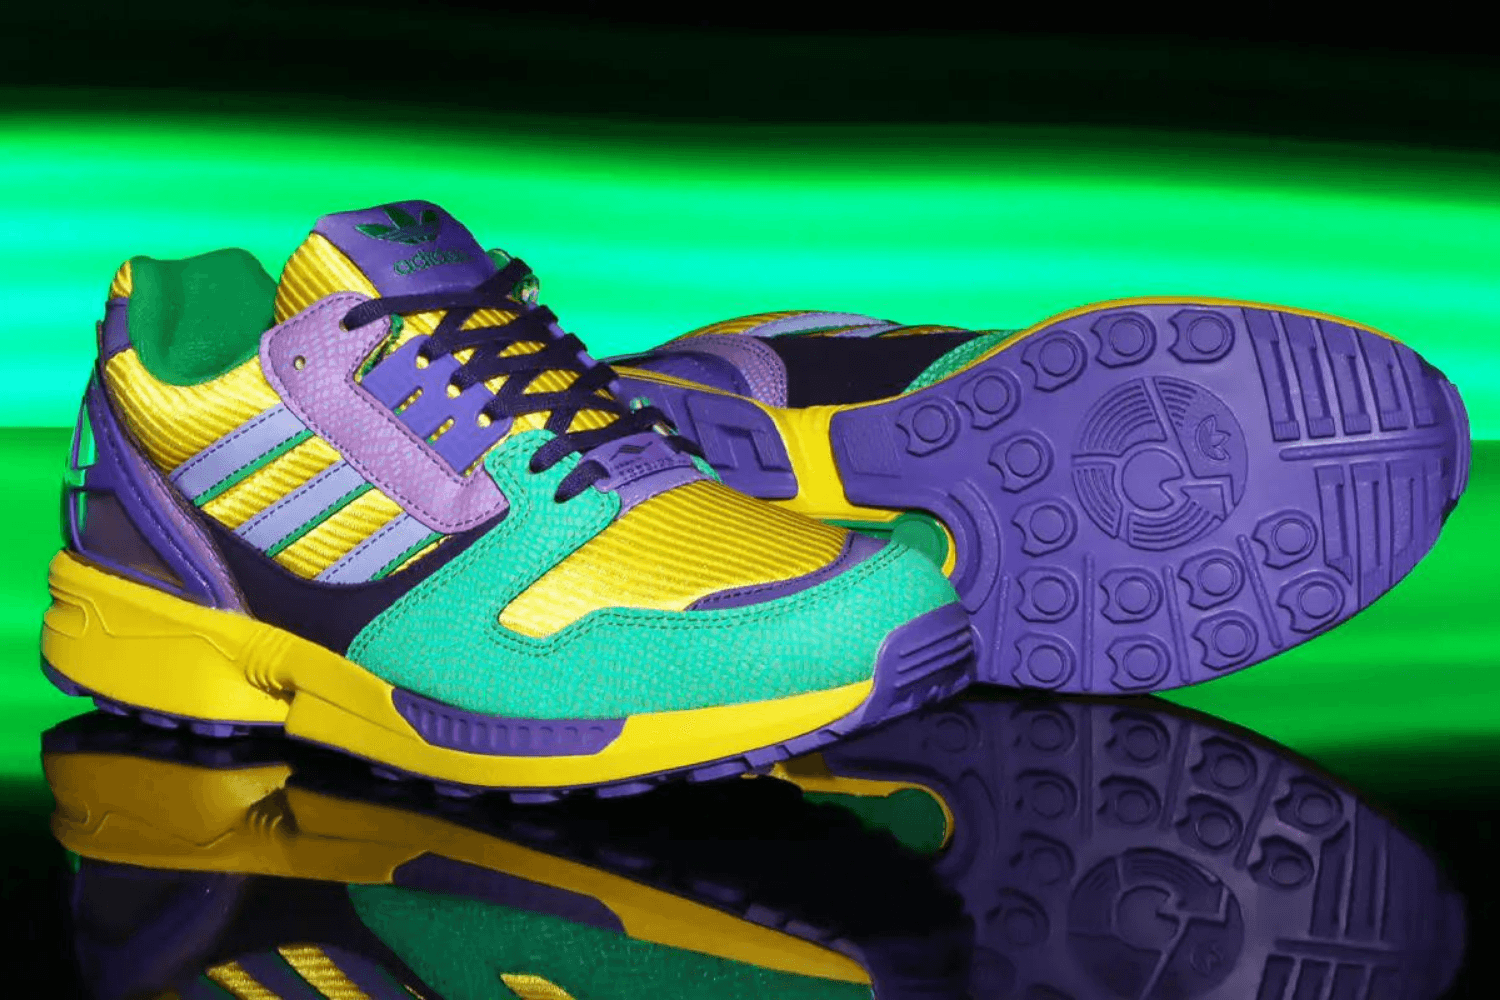 The atmos x adidas ZX 8000 G-SNK is getting a new colorway